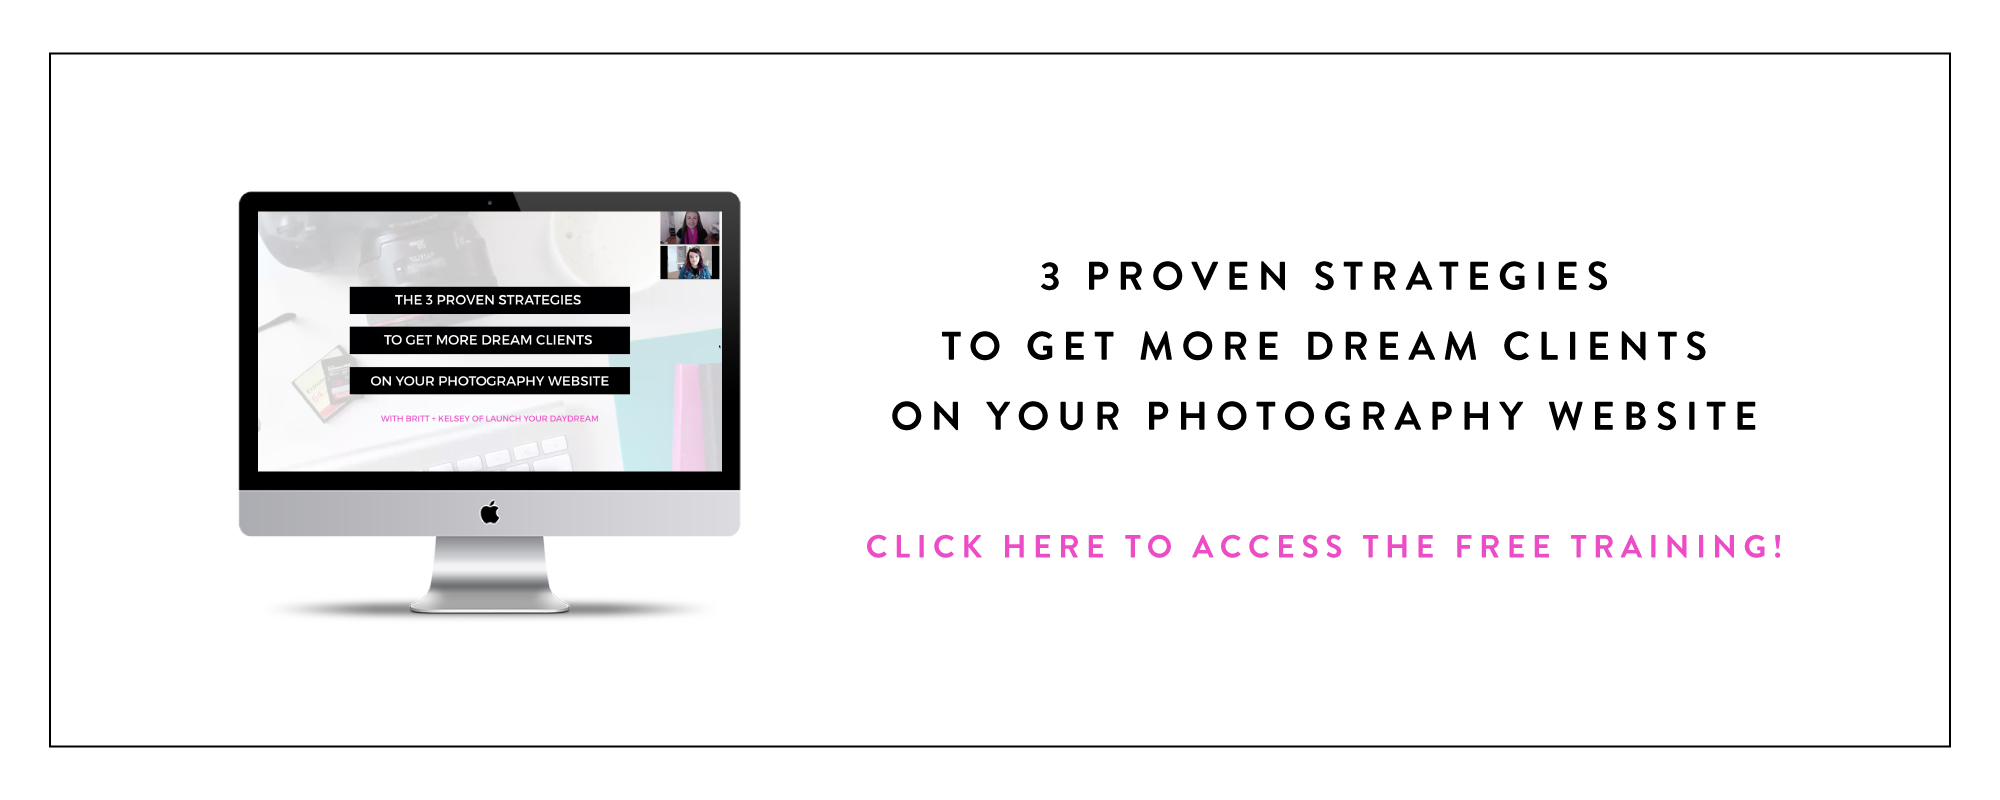 Click here for 3 proven strategies to get more dream clients on your photography website